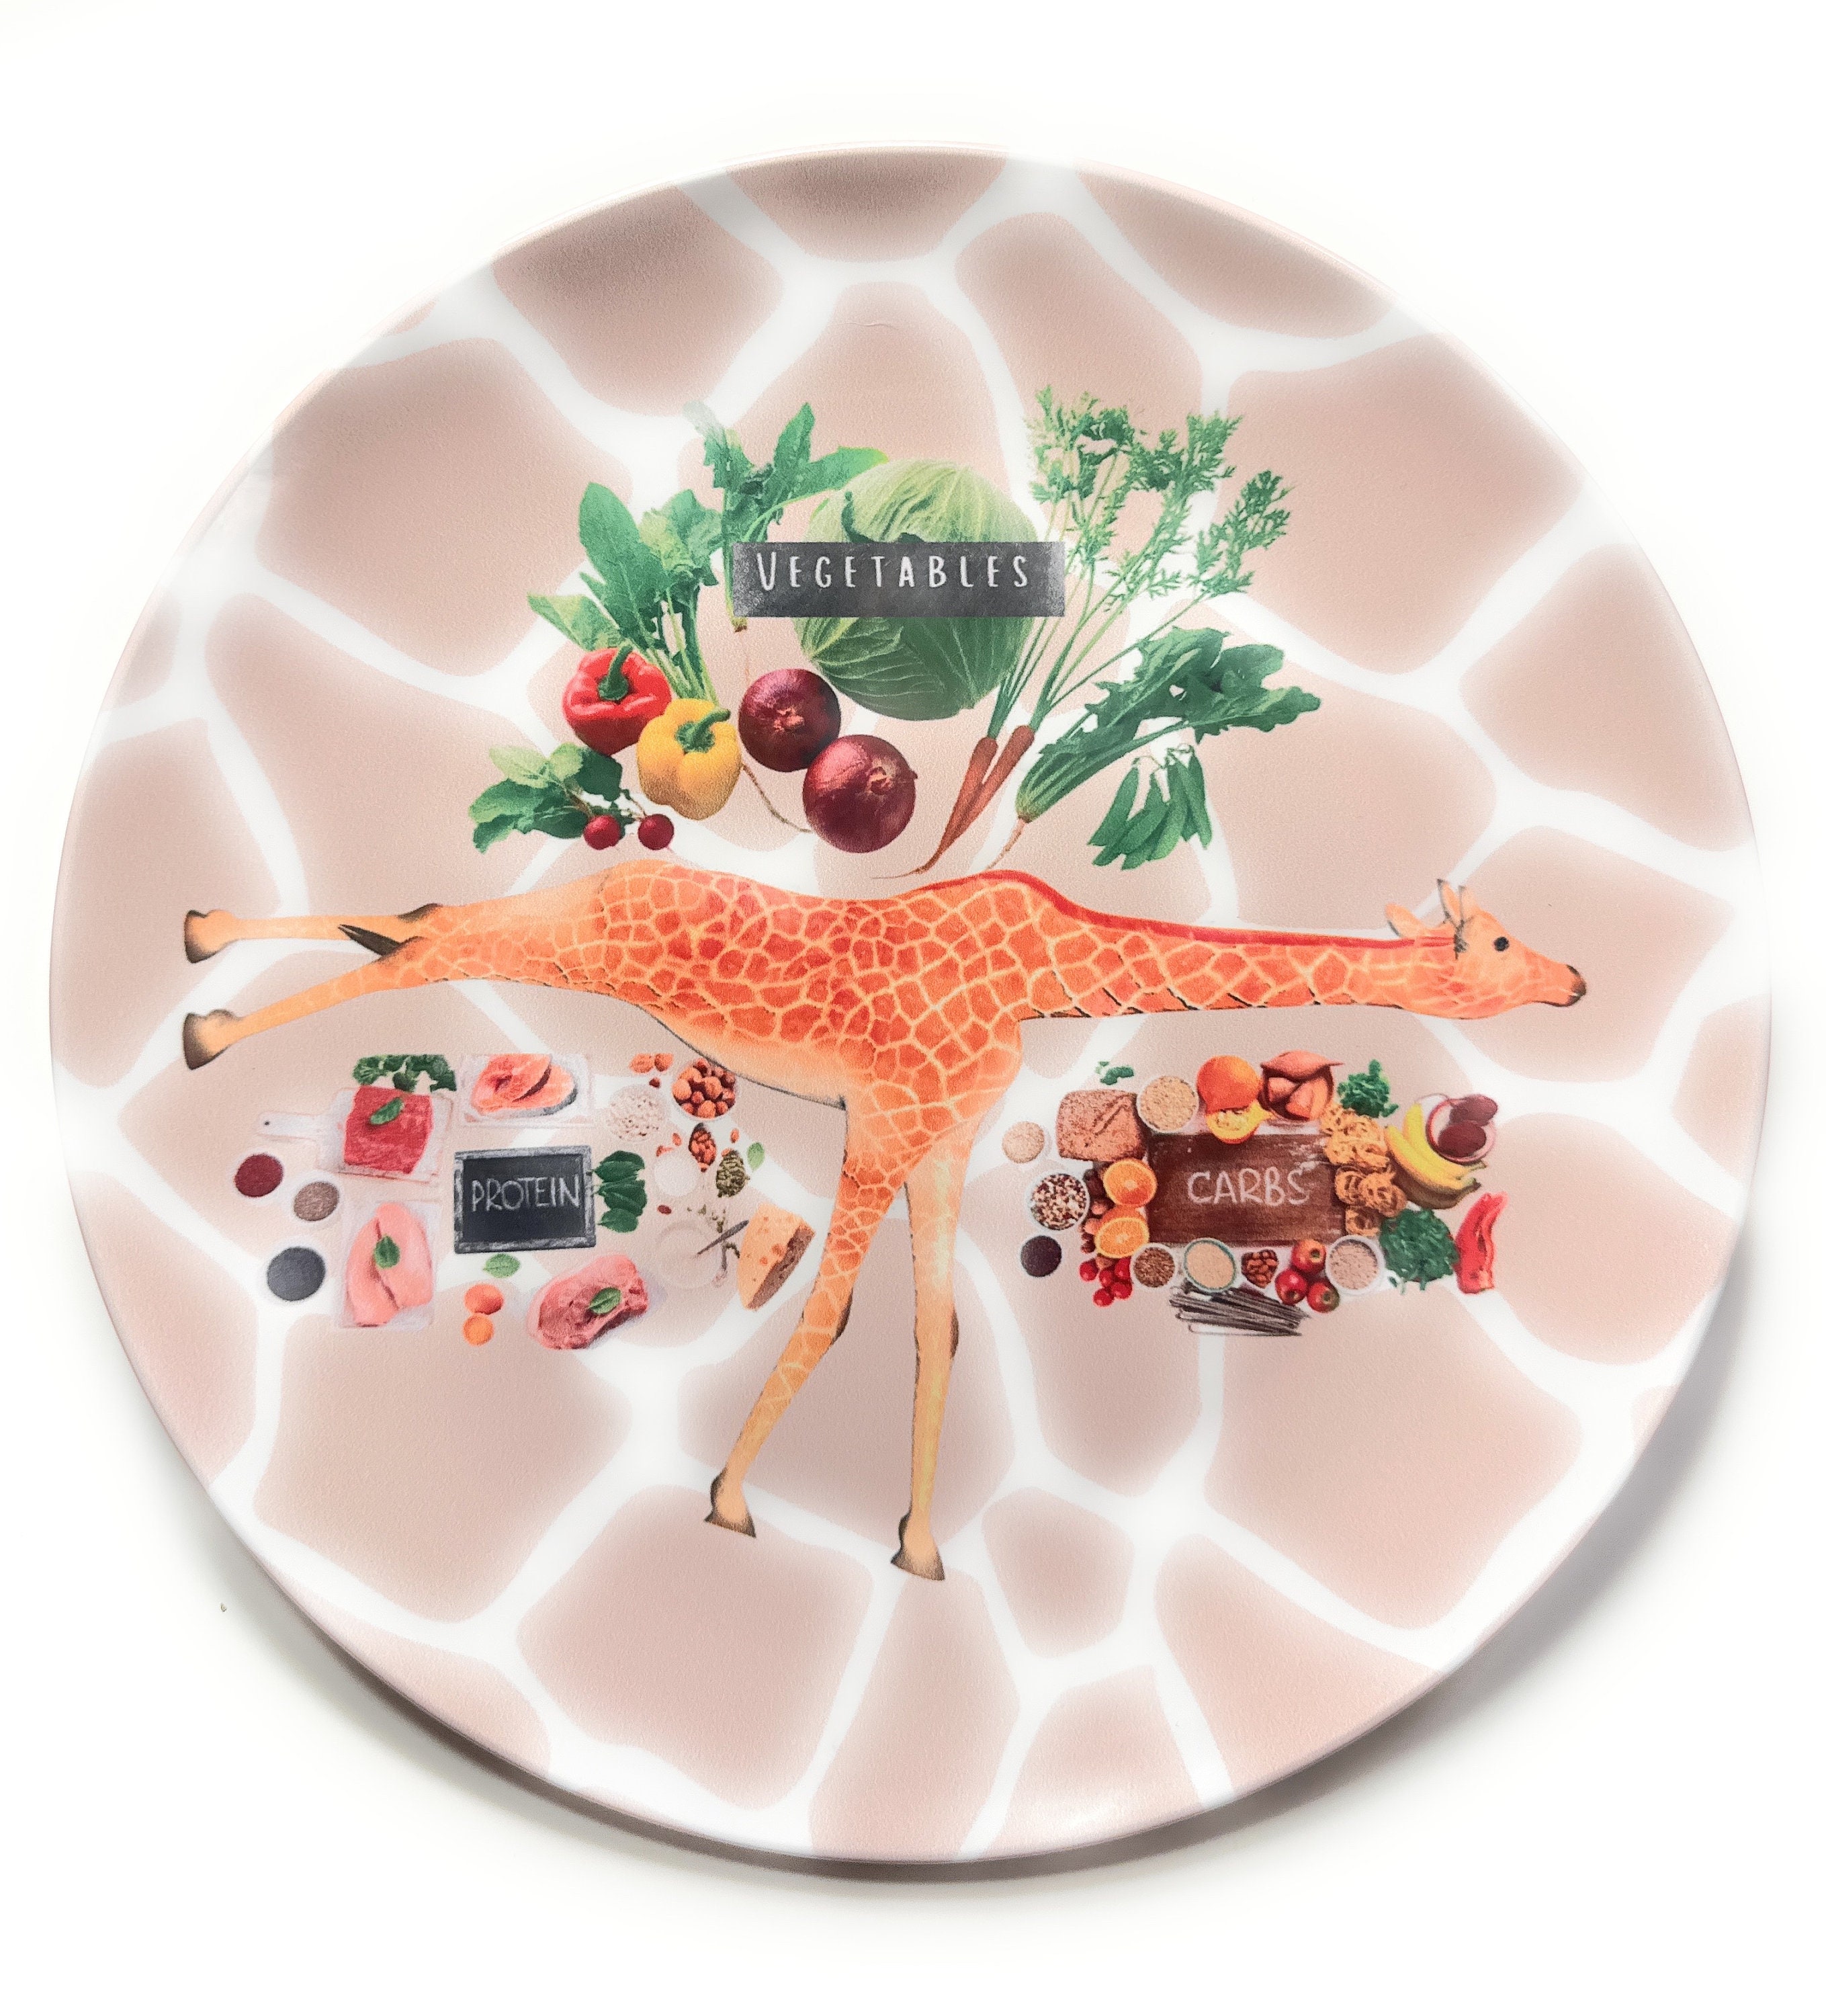 Portion Perfection Porcelain Bariatric Plates for Portion Control - 8 inch  - Dietitian Owned - Bariatric Surgery Must Haves - Perfect for Post Gastric  Sleeve and Gastric Bypass Weight Loss Plans: Dinner Plates 